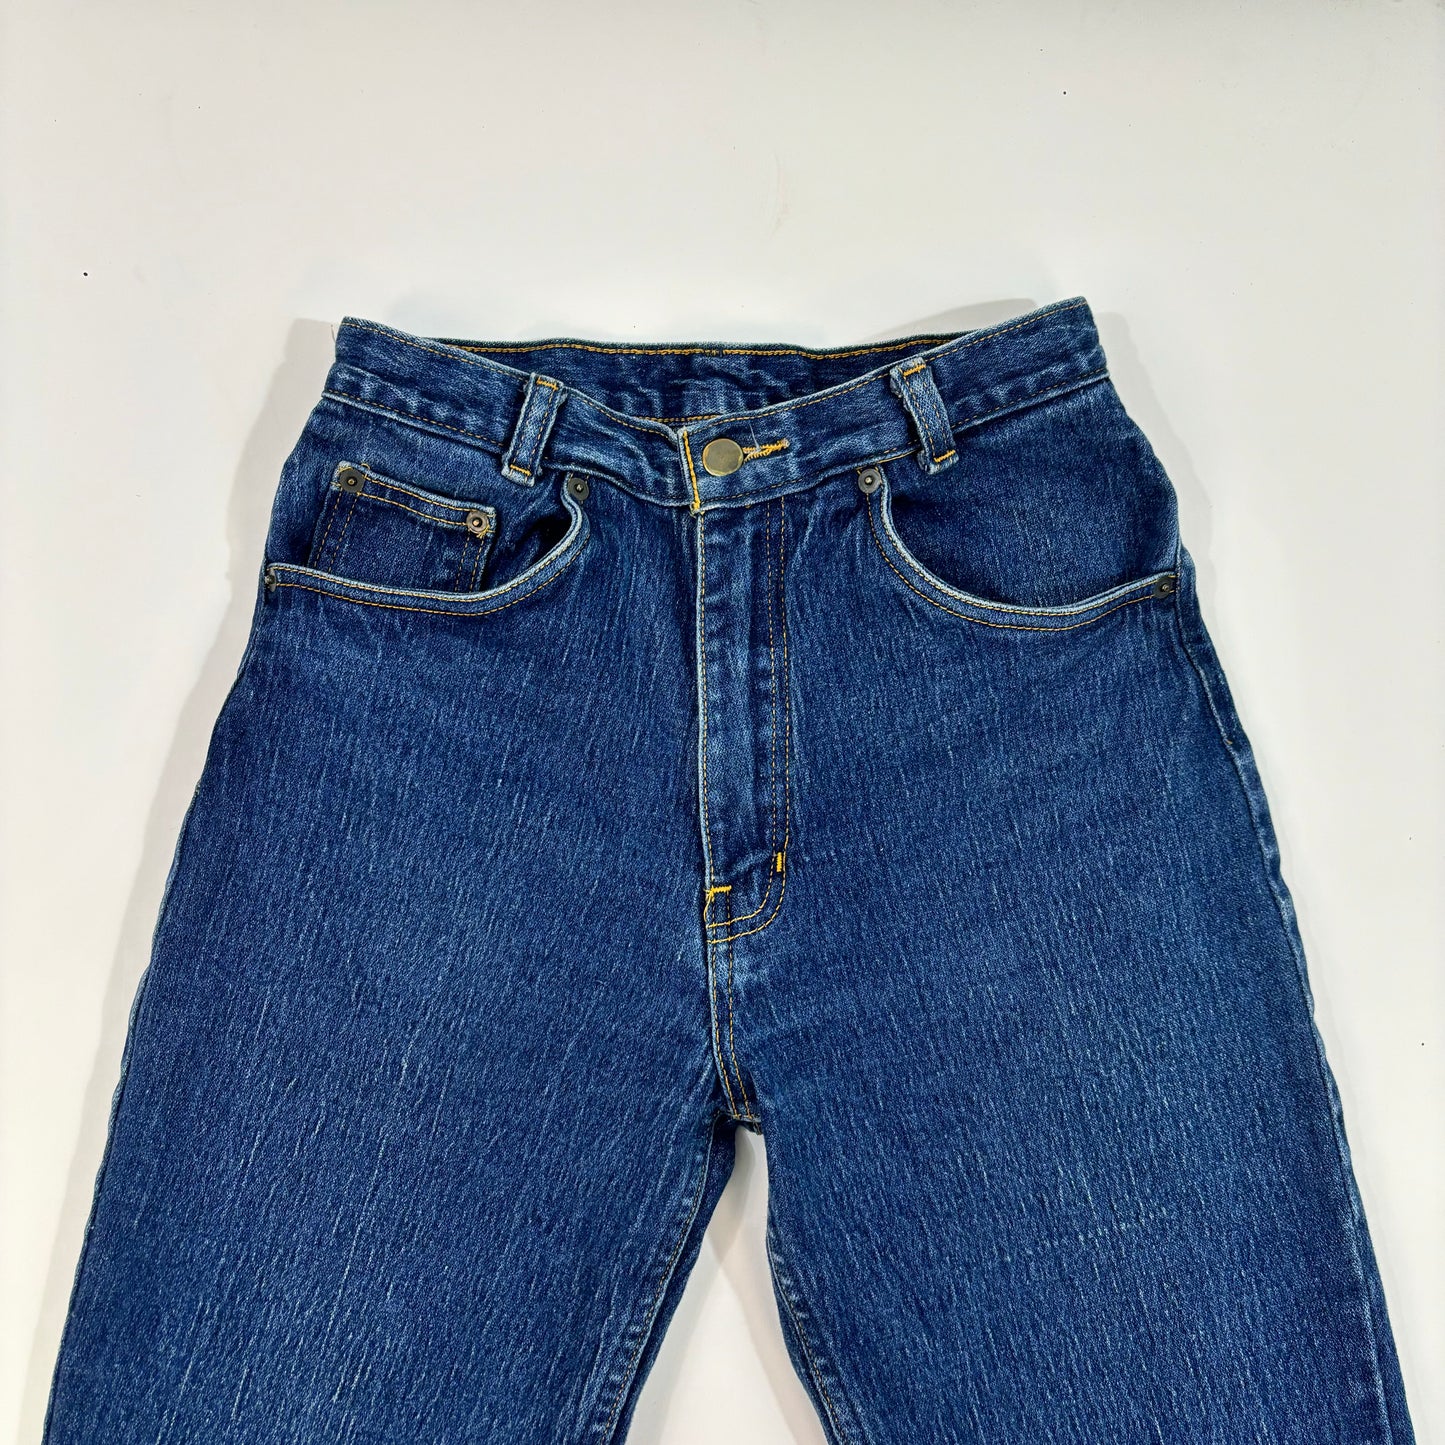 Vintage Wally High Waisted Jeans - 25